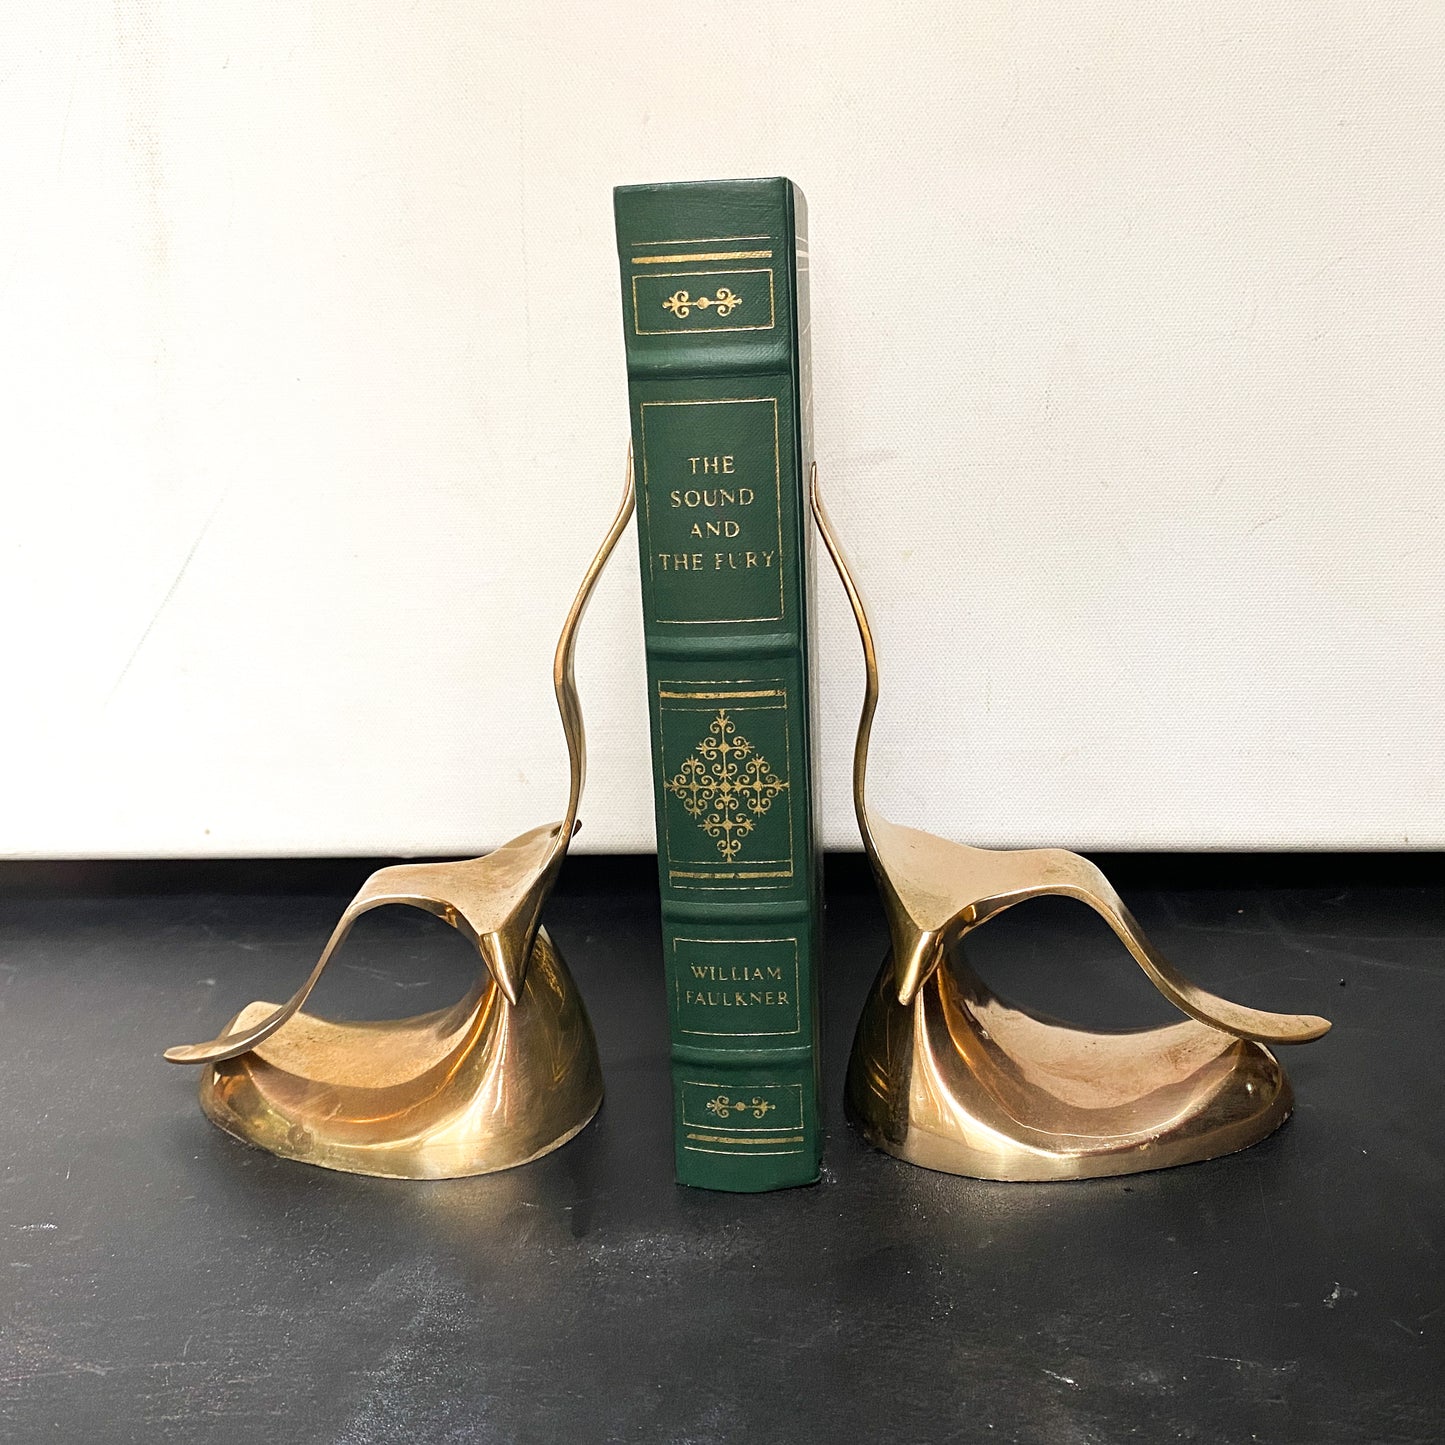 Vintage Brass Seagull Bookends, Midcentury Modern Style